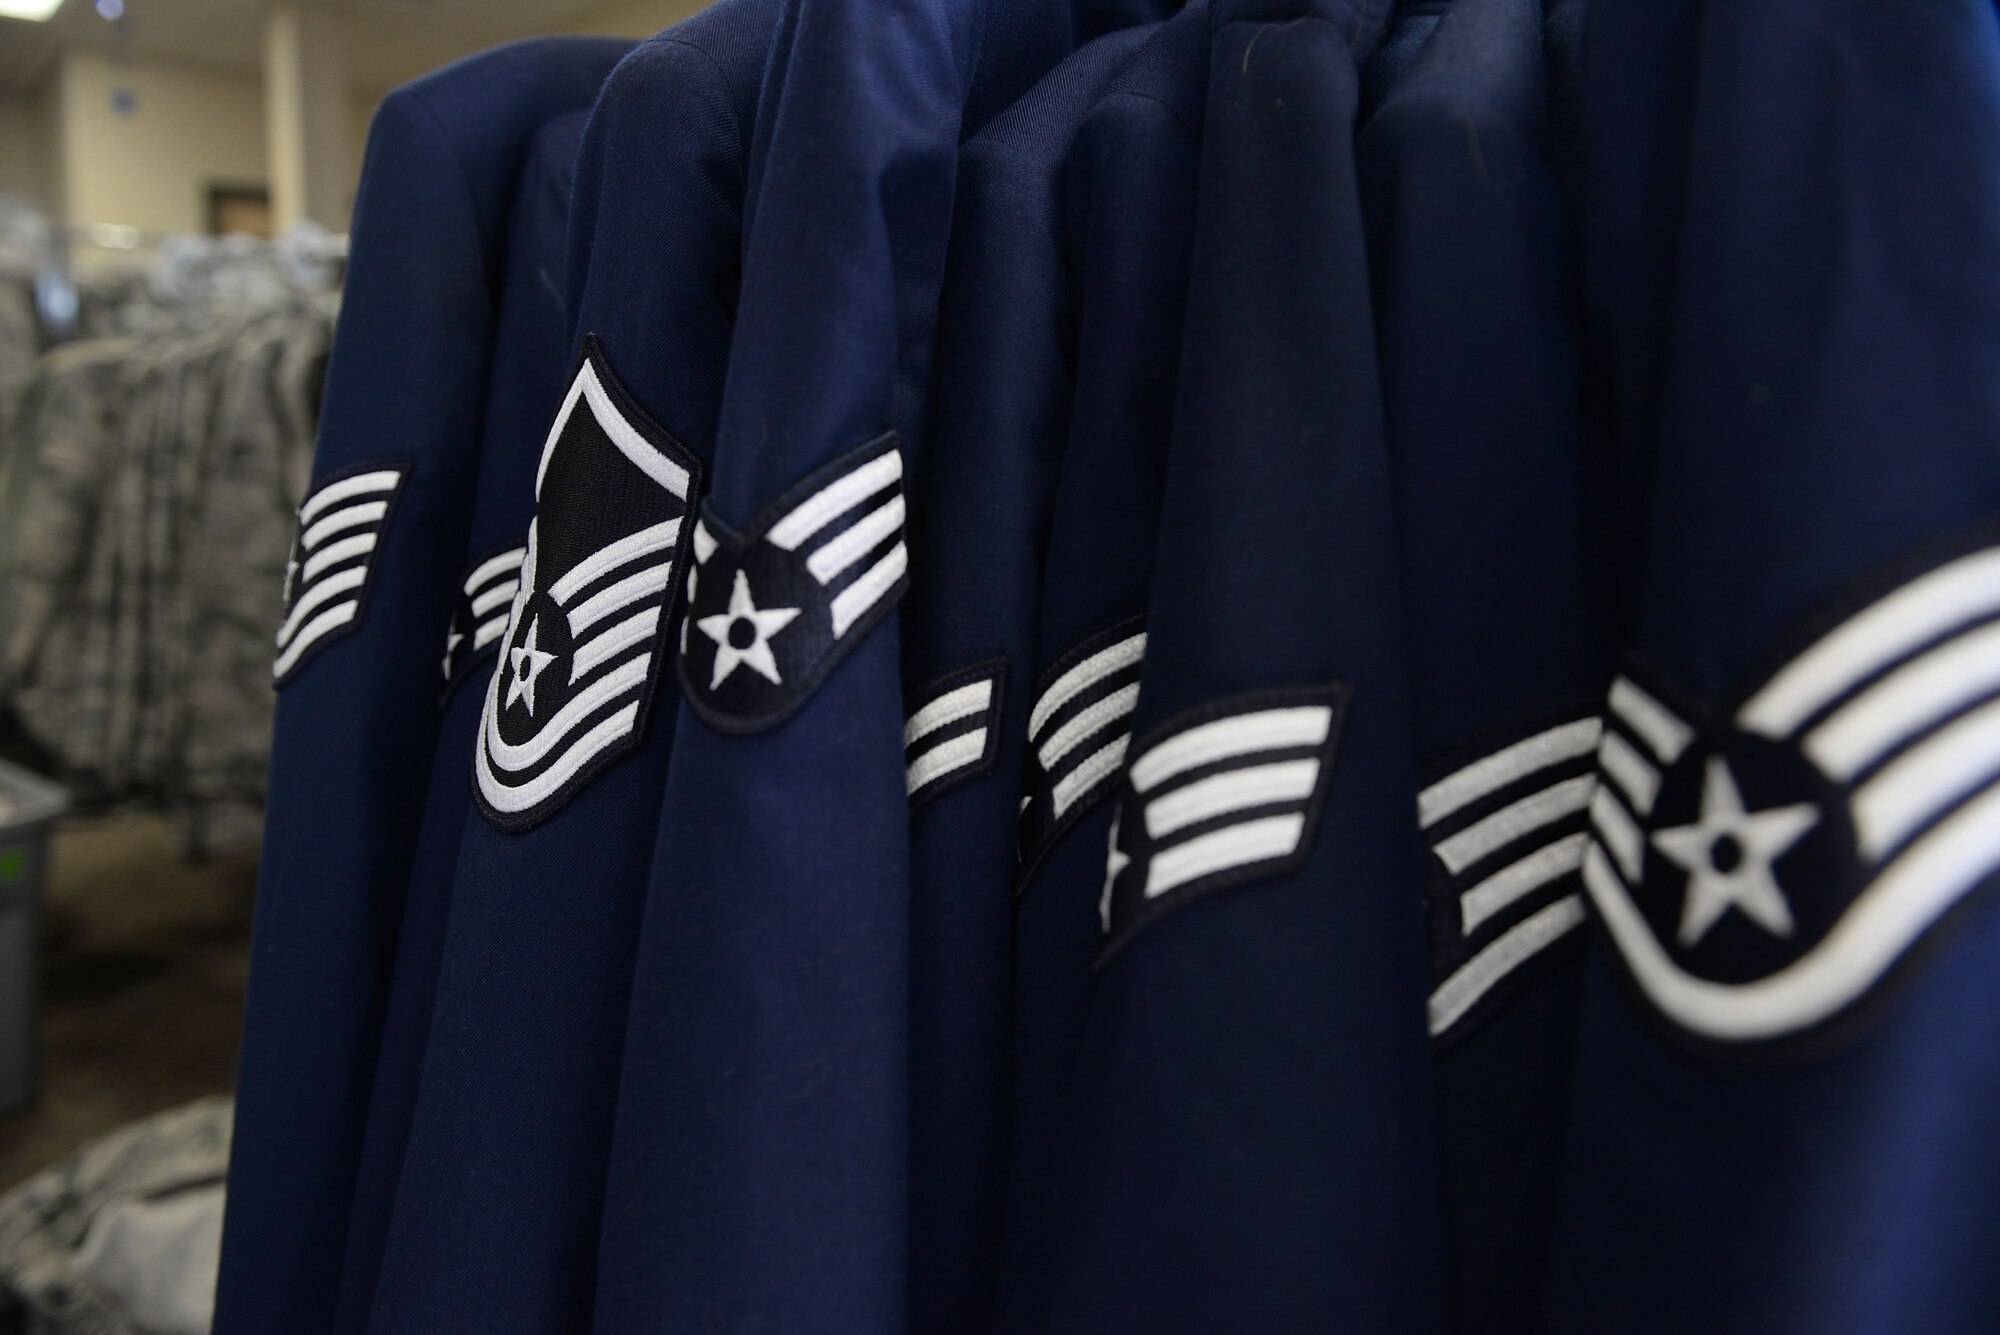 Air Force service jackets hung in a line with many different rank insignias including staff sergeant, senior airman, airman 1st class, master sergeant and technical sergeant.